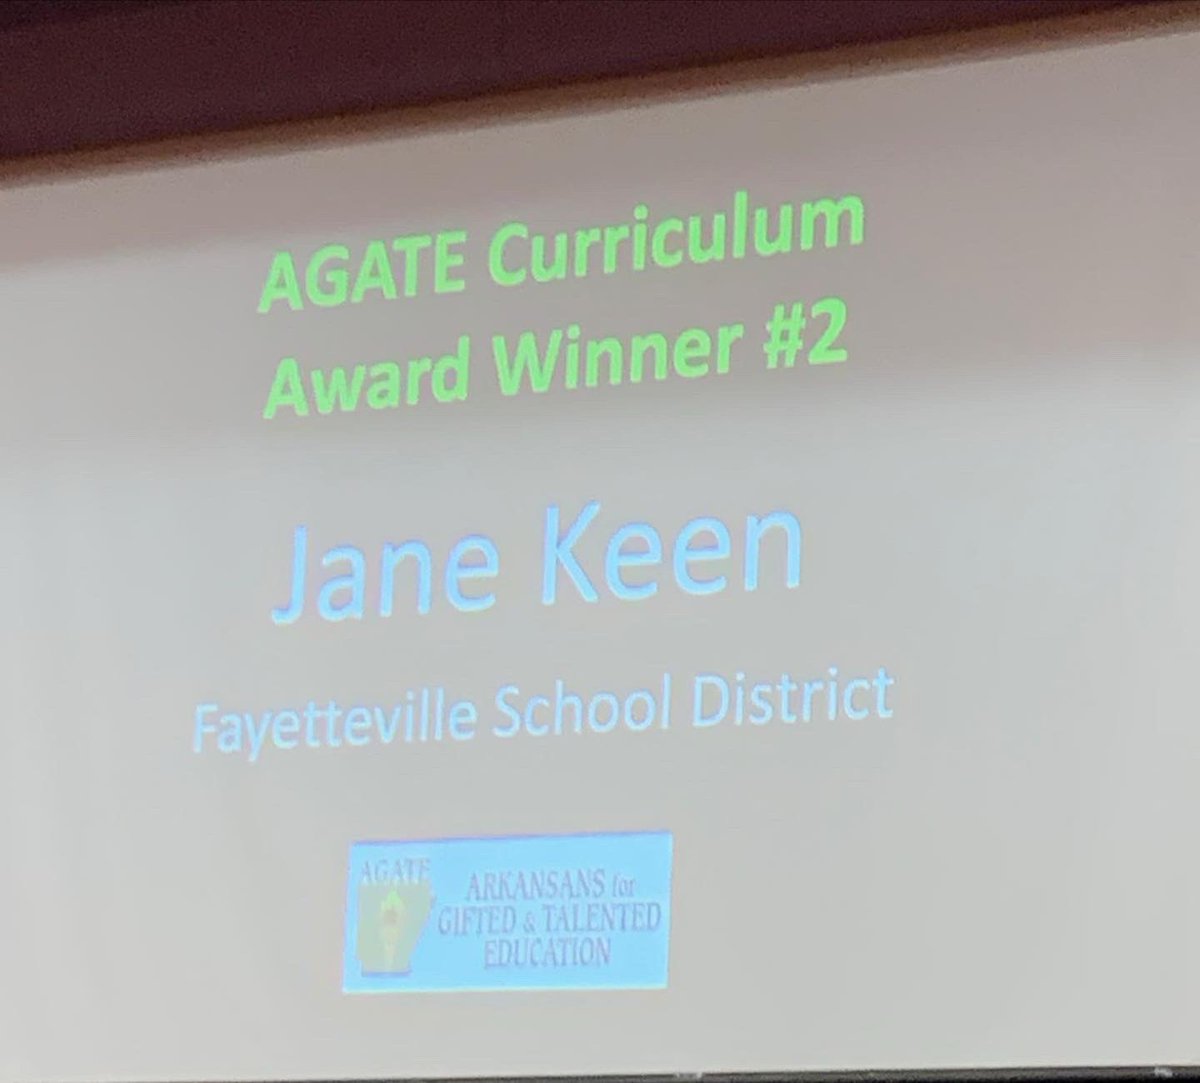 Shout out to our two fantastic McNair GT teachers!  During today’s AGATE Conference, Carol Huneycutt received the Educator Recognition Award and Jane Keen received the Curriculum Award. Way to go team! #mustangsrun #builtdifferent #awardwinningteam